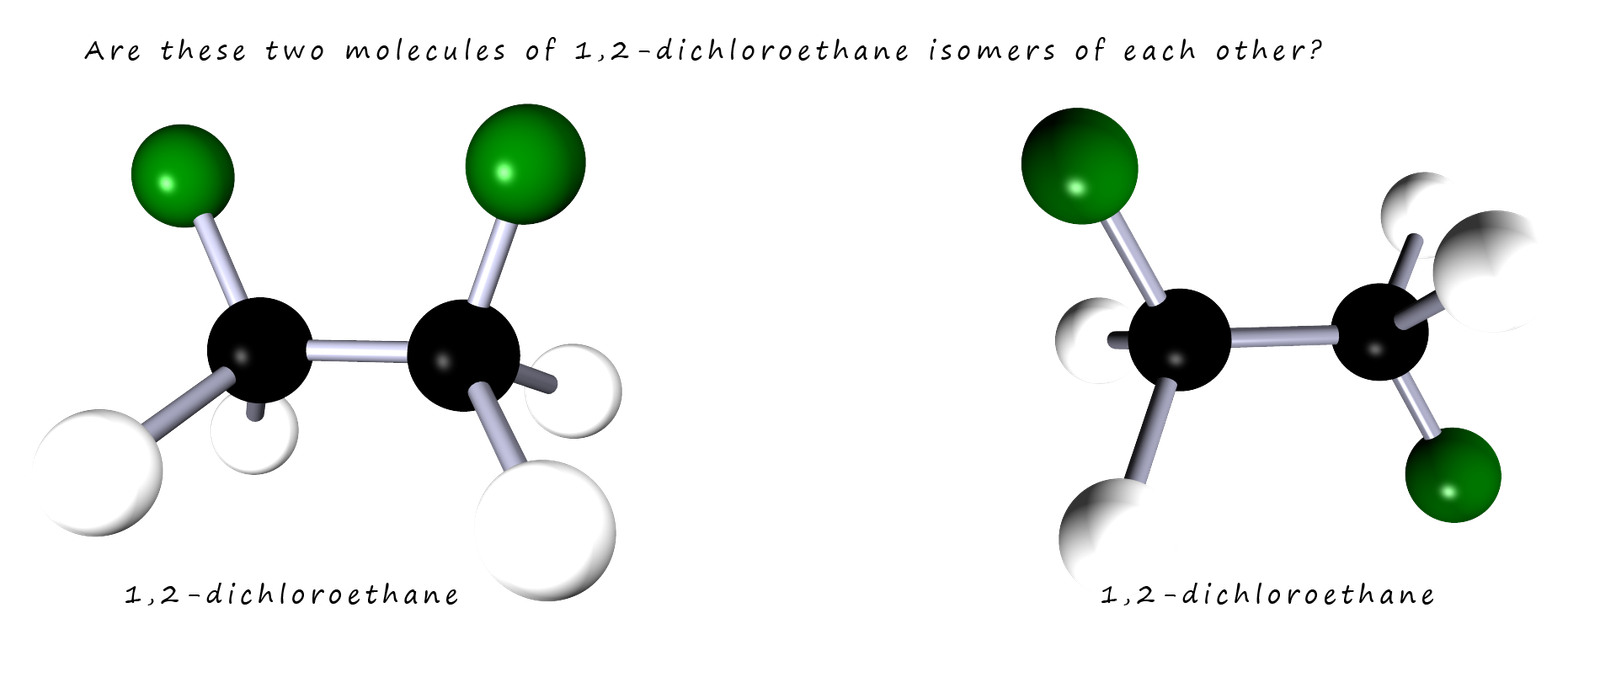 3d models of stereoisomers.